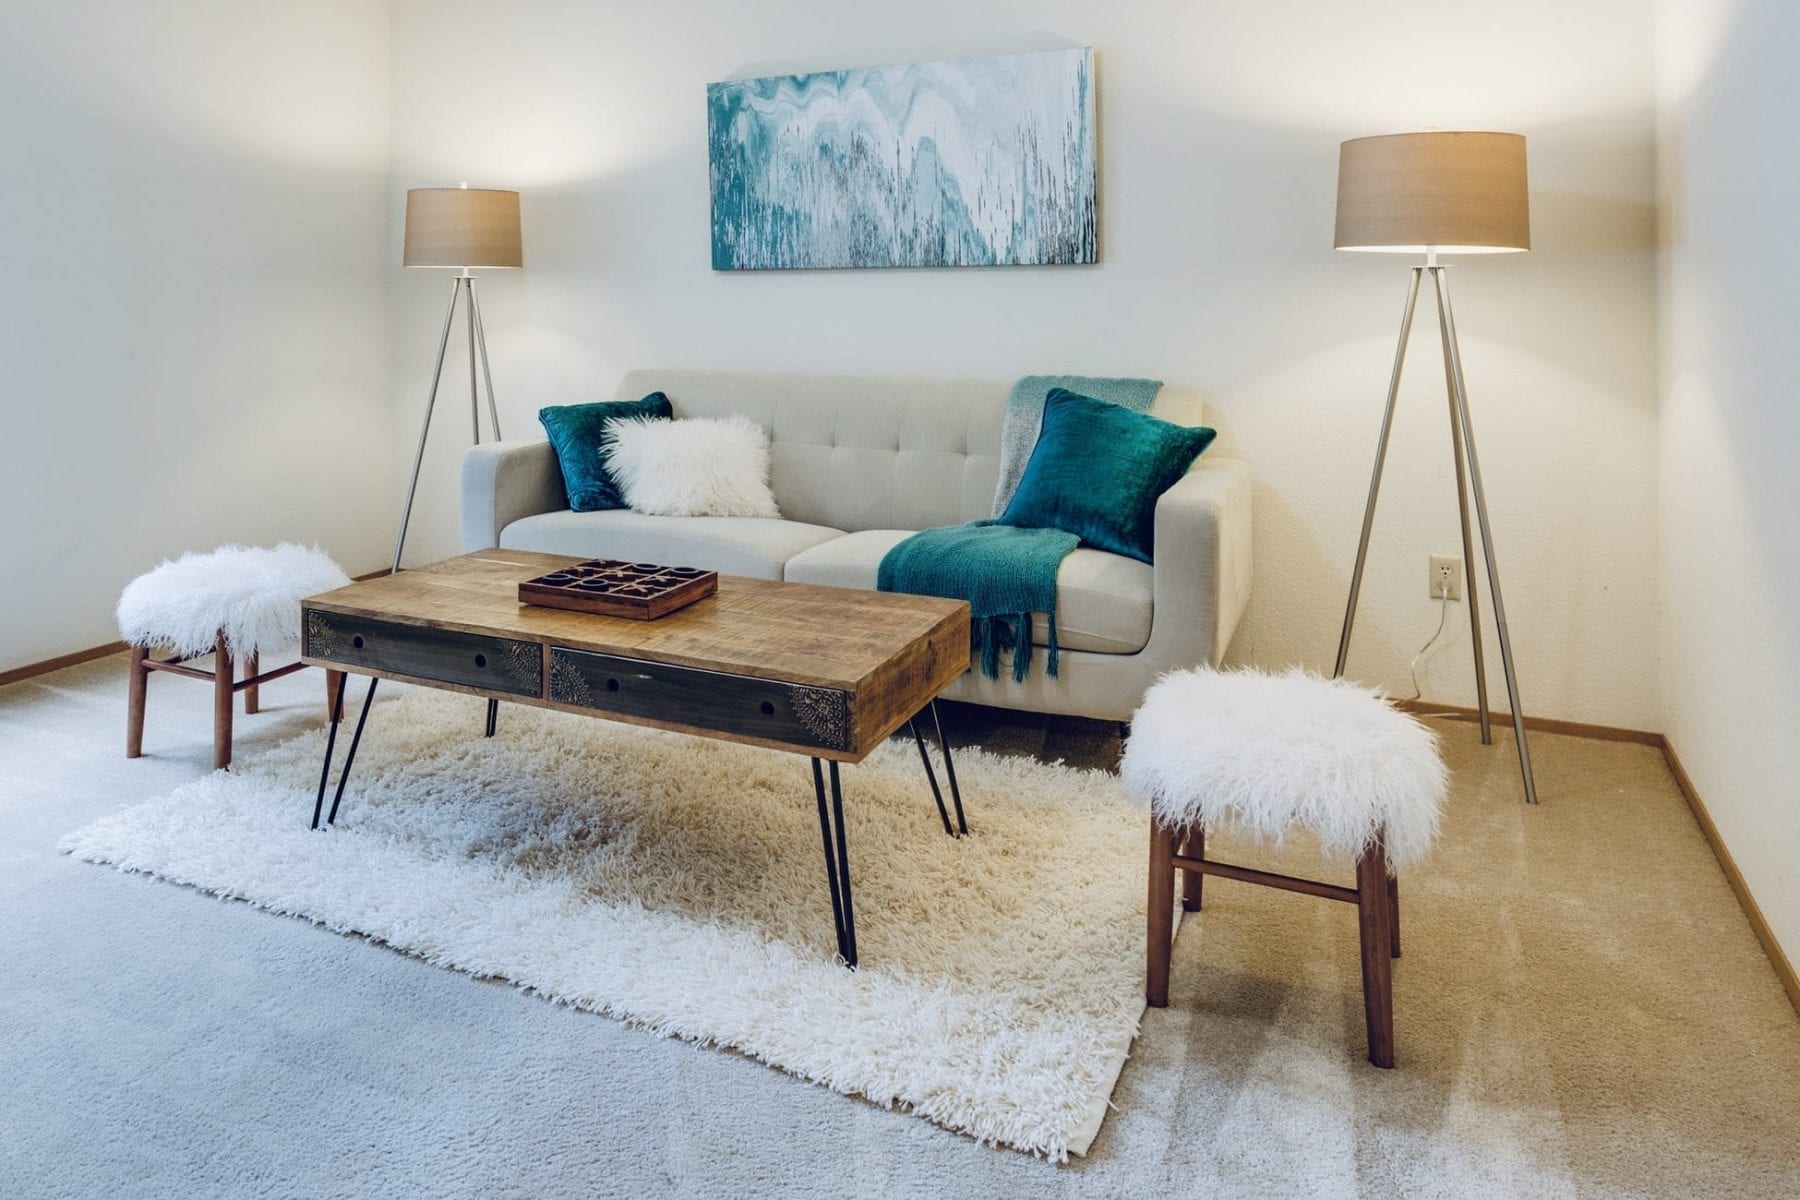 Our Top Design Tips For Styling Rugs On, How To Keep An Area Rug Flat On Top Of Carpet